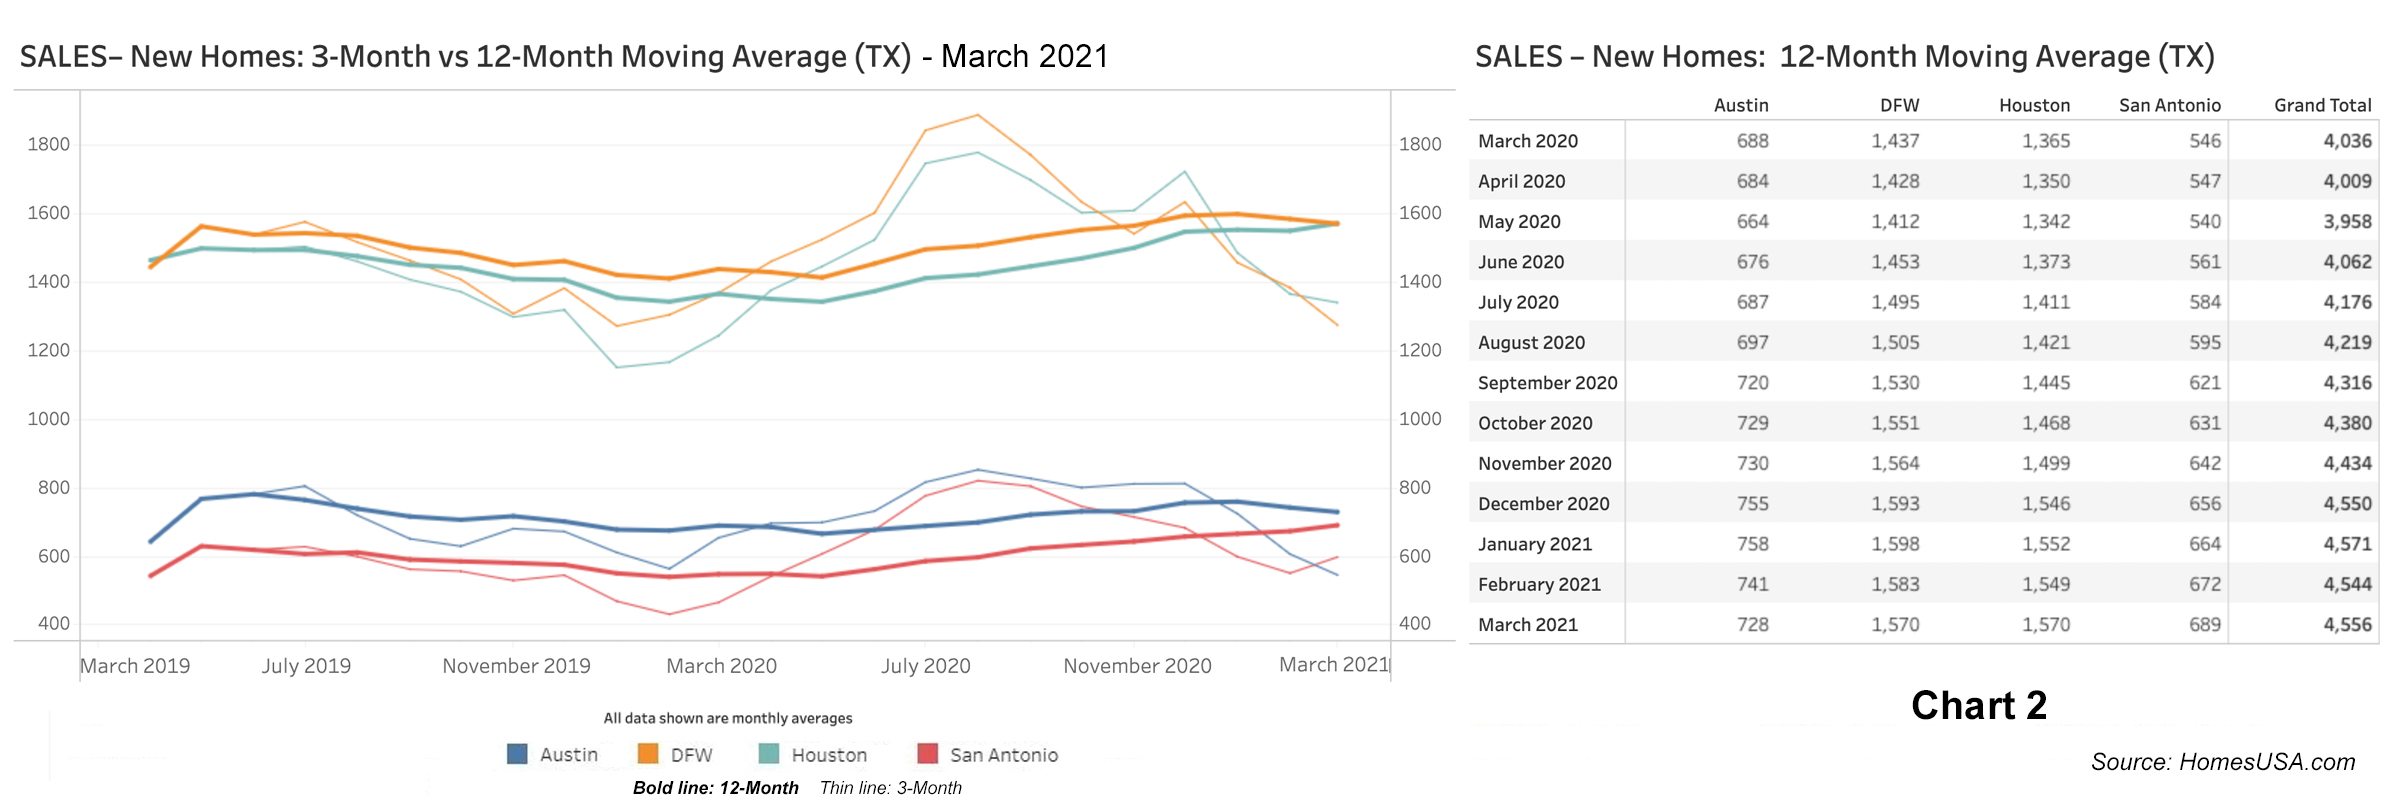 Chart 2: Texas New Home Sales - March 2021